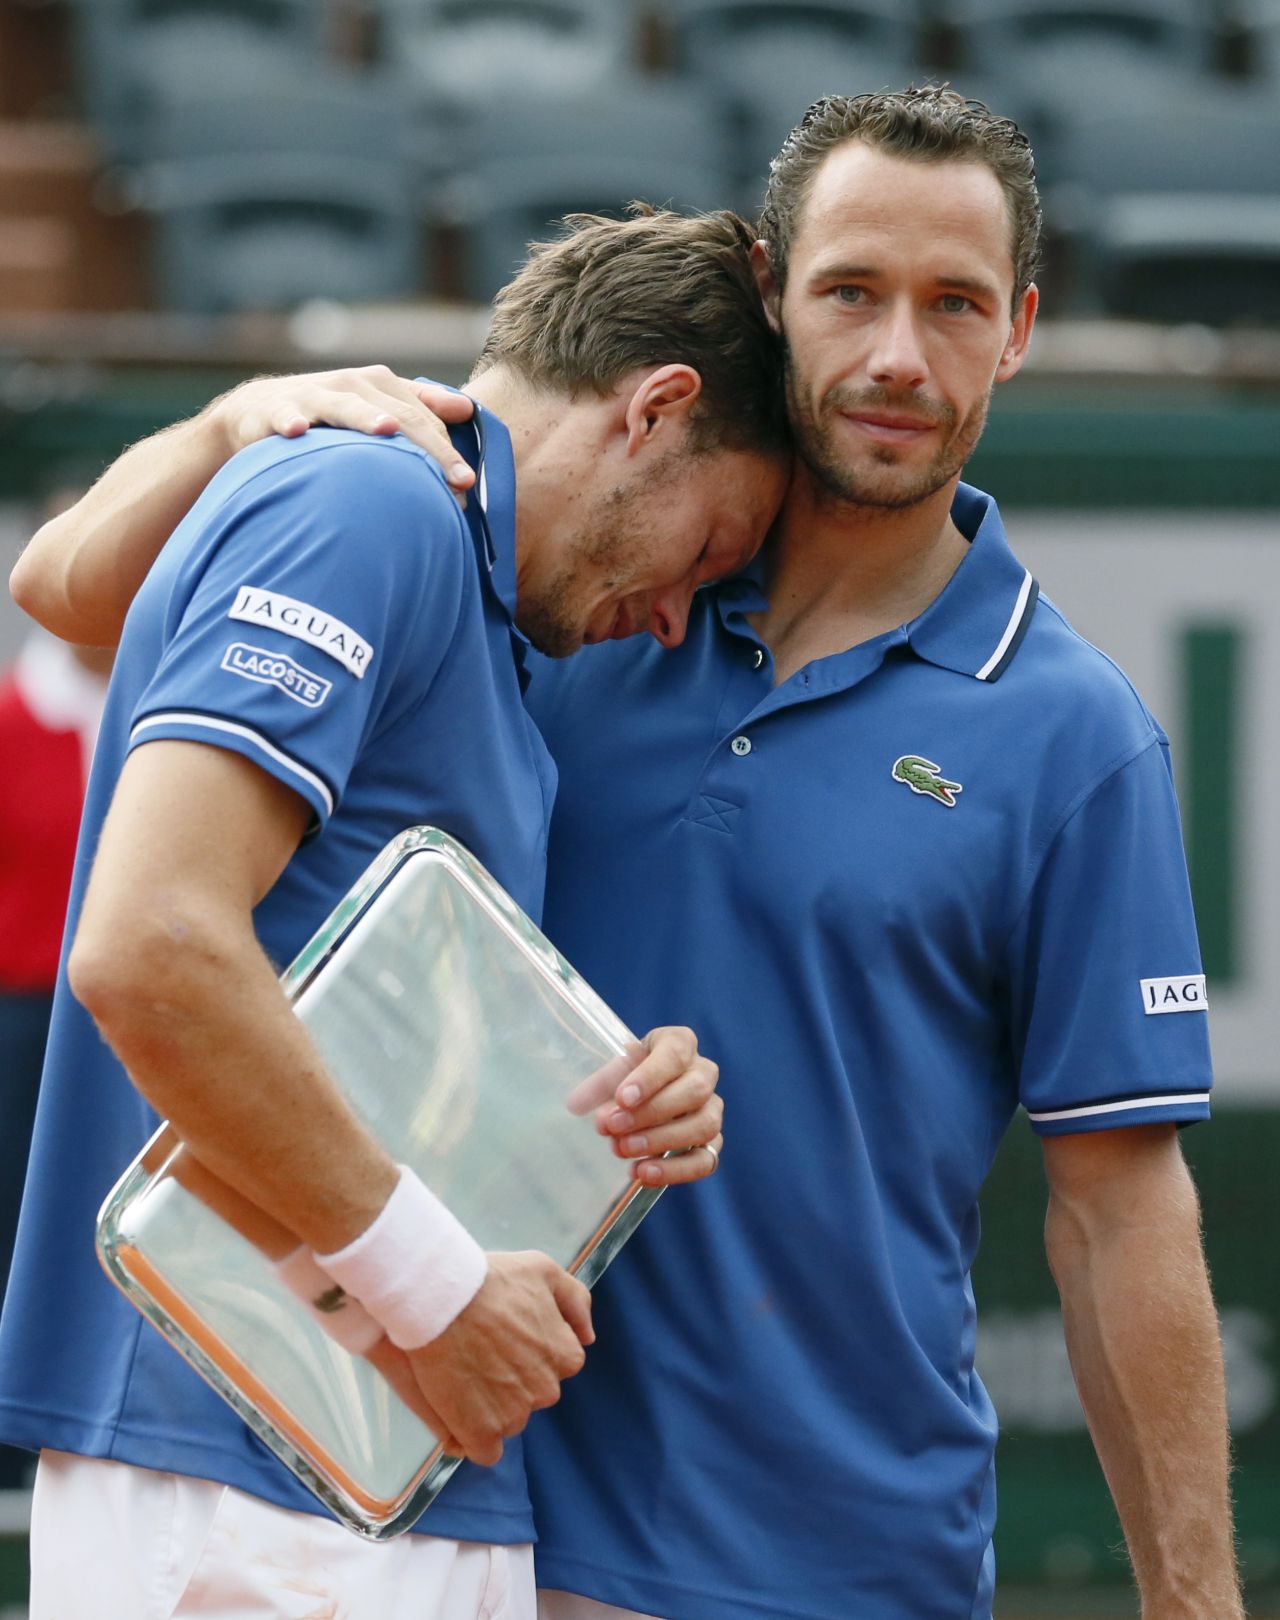 There was more heartache for Mahut in the 2013 French Open doubles final. He and partner Michael Llodra lost to Americans Bob and Mike Bryan in a third-set tiebreak. Mahut wept afterward. 